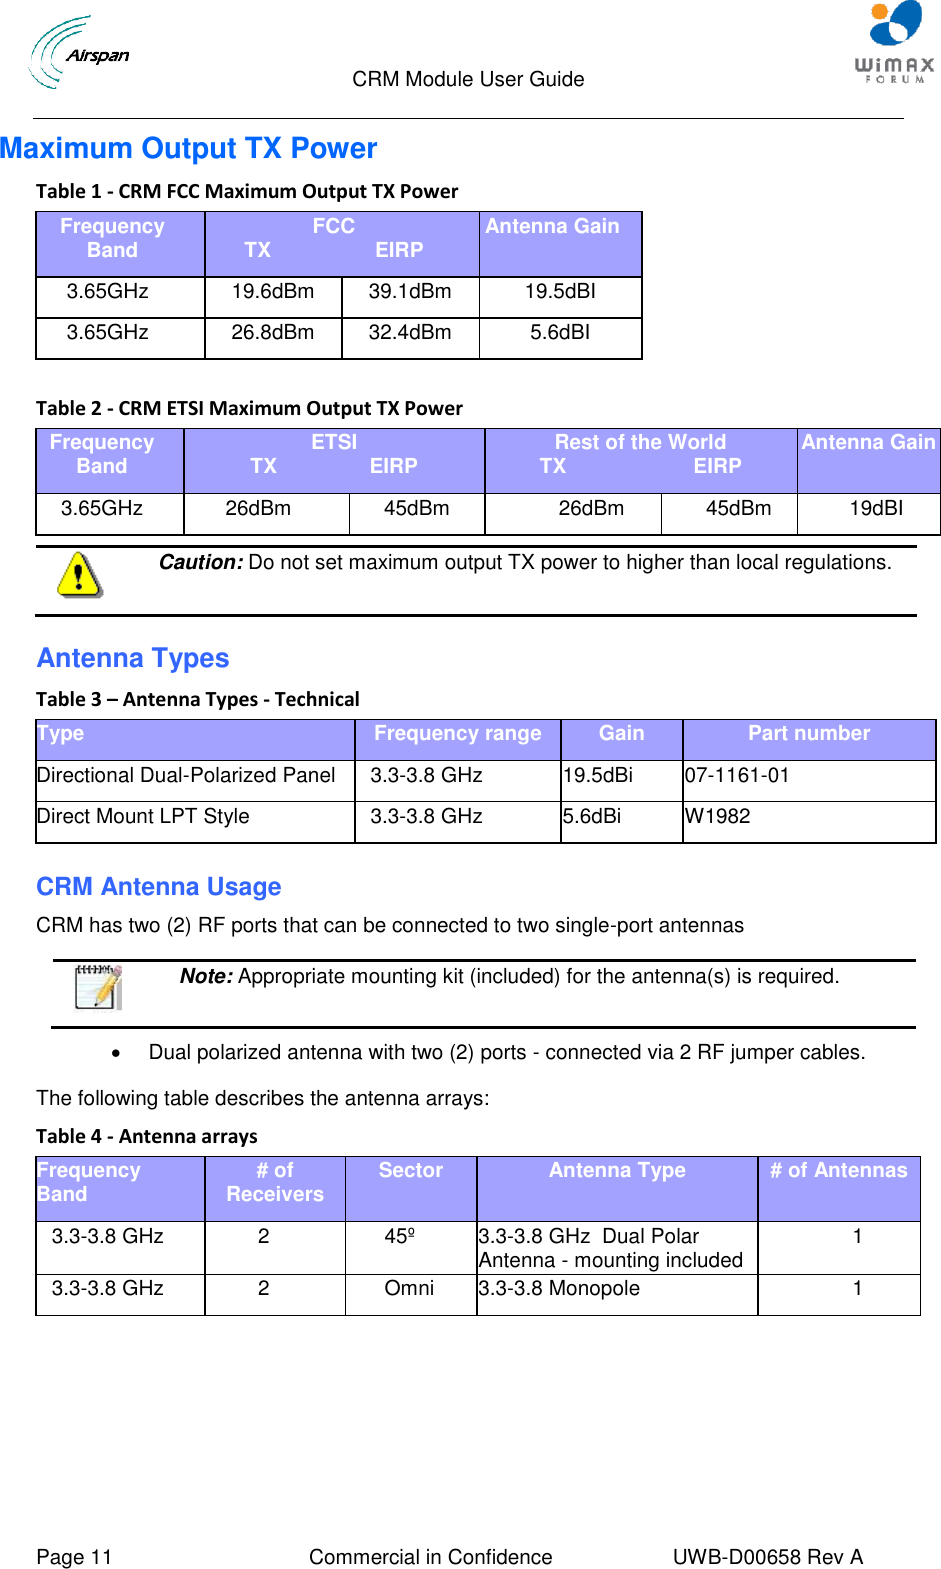                                  CRM Module User Guide     Page 11  Commercial in Confidence  UWB-D00658 Rev A    Maximum Output TX Power Table 1 - CRM FCC Maximum Output TX Power Frequency Band FCC TX                  EIRP Antenna Gain 3.65GHz 19.6dBm 39.1dBm 19.5dBI 3.65GHz 26.8dBm 32.4dBm 5.6dBI    Table 2 - CRM ETSI Maximum Output TX Power Frequency Band ETSI TX                EIRP Rest of the World TX                      EIRP Antenna Gain 3.65GHz 26dBm 45dBm 26dBm 45dBm 19dBI   Caution: Do not set maximum output TX power to higher than local regulations. Antenna Types Table 3 – Antenna Types - Technical Type Frequency range Gain Part number Directional Dual-Polarized Panel 3.3-3.8 GHz 19.5dBi 07-1161-01 Direct Mount LPT Style  3.3-3.8 GHz 5.6dBi W1982  CRM Antenna Usage CRM has two (2) RF ports that can be connected to two single-port antennas    Note: Appropriate mounting kit (included) for the antenna(s) is required.    Dual polarized antenna with two (2) ports - connected via 2 RF jumper cables.  The following table describes the antenna arrays: Table 4 - Antenna arrays Frequency Band # of Receivers Sector Antenna Type # of Antennas  3.3-3.8 GHz 2 45º 3.3-3.8 GHz  Dual Polar Antenna - mounting included 1 3.3-3.8 GHz 2 Omni 3.3-3.8 Monopole 1    